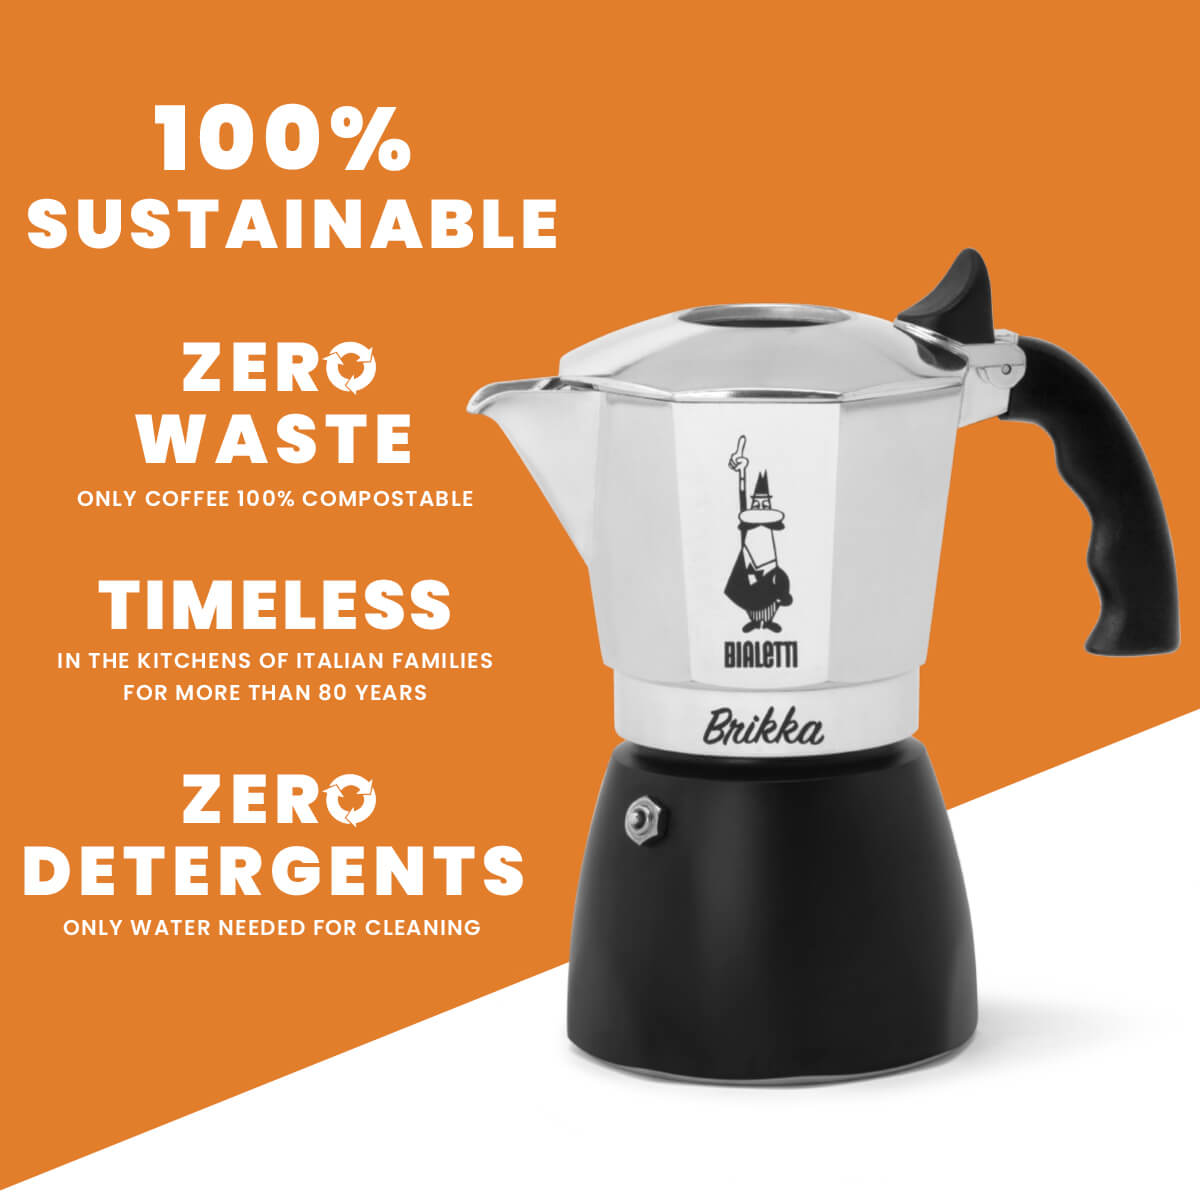 Sustainable coffee maker by Bialetti free uk delivery